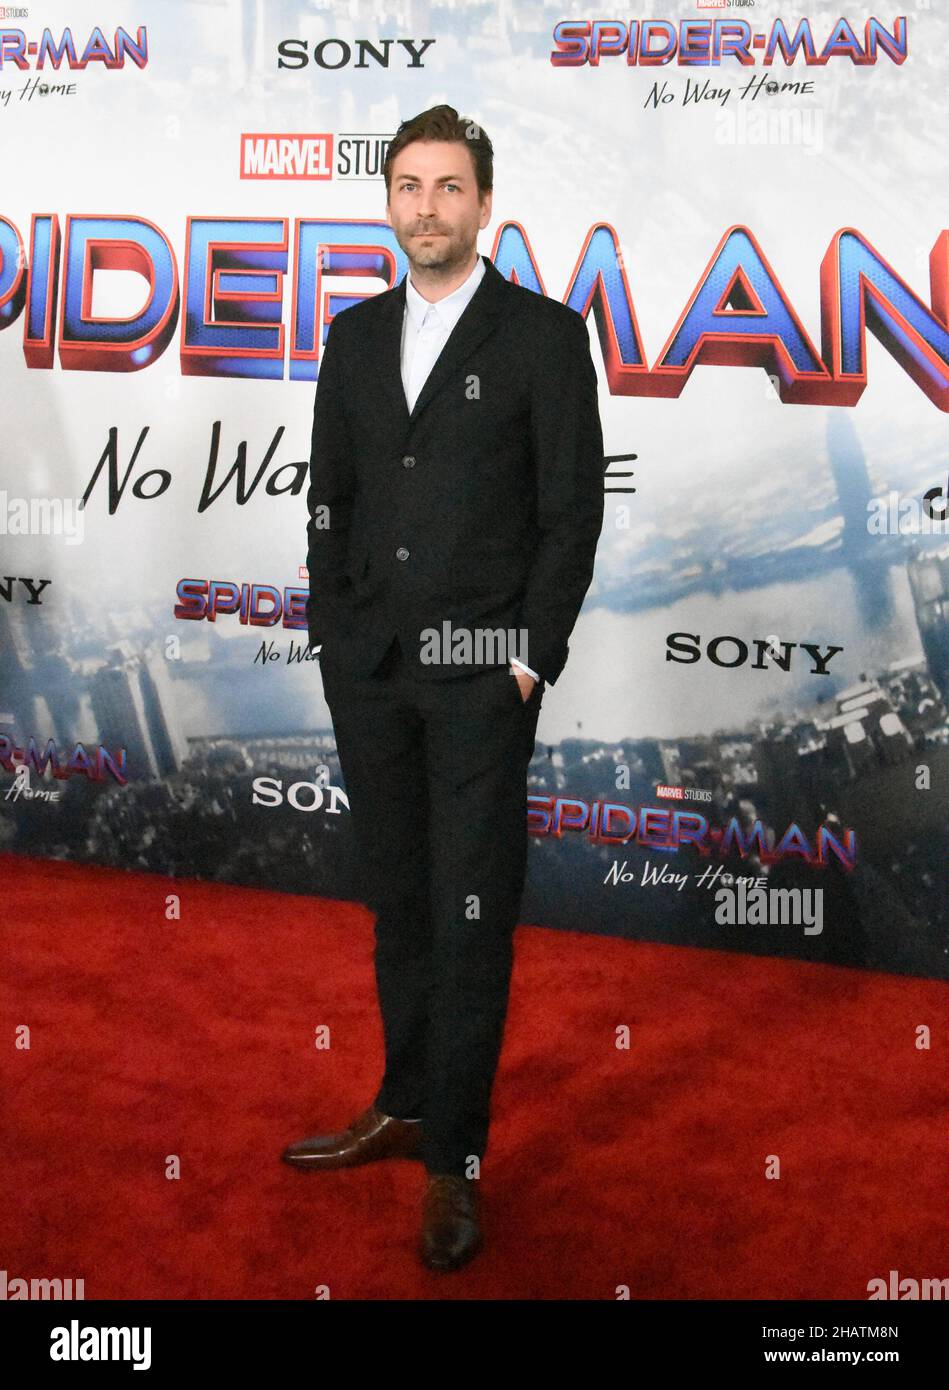 Spider-Man: No Way Home' (2021) - This live-action film by Jon Watts had a  budget of $200 million and received 93% on RottenTomatoes with 7.9/10  average and 71/100 on Metacritic. It is